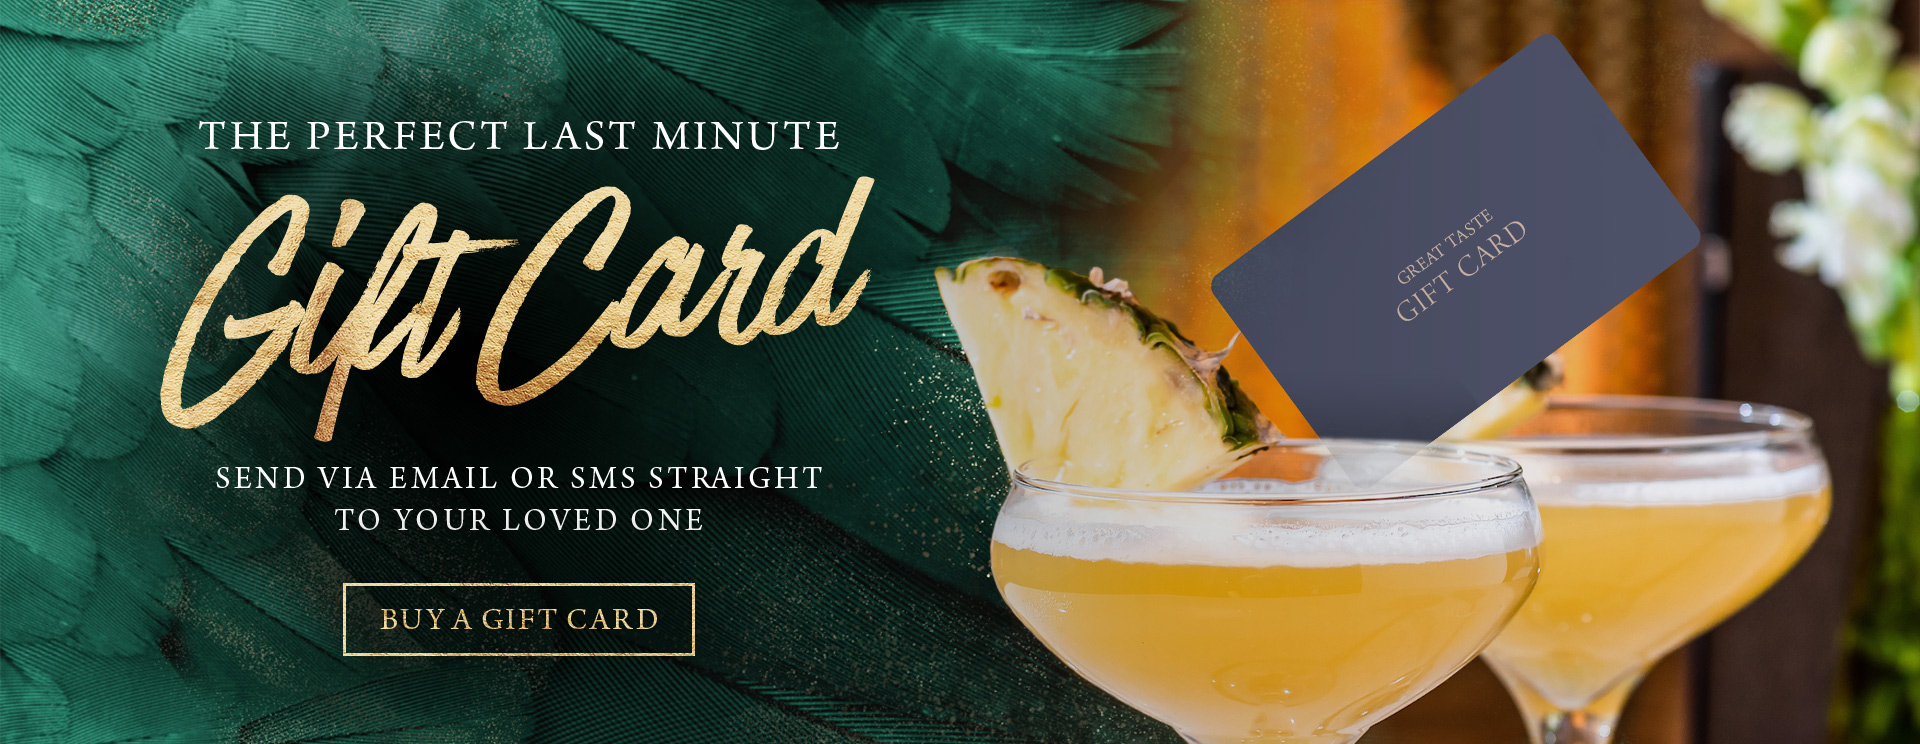 Give the gift of a gift card at The Kings Arms